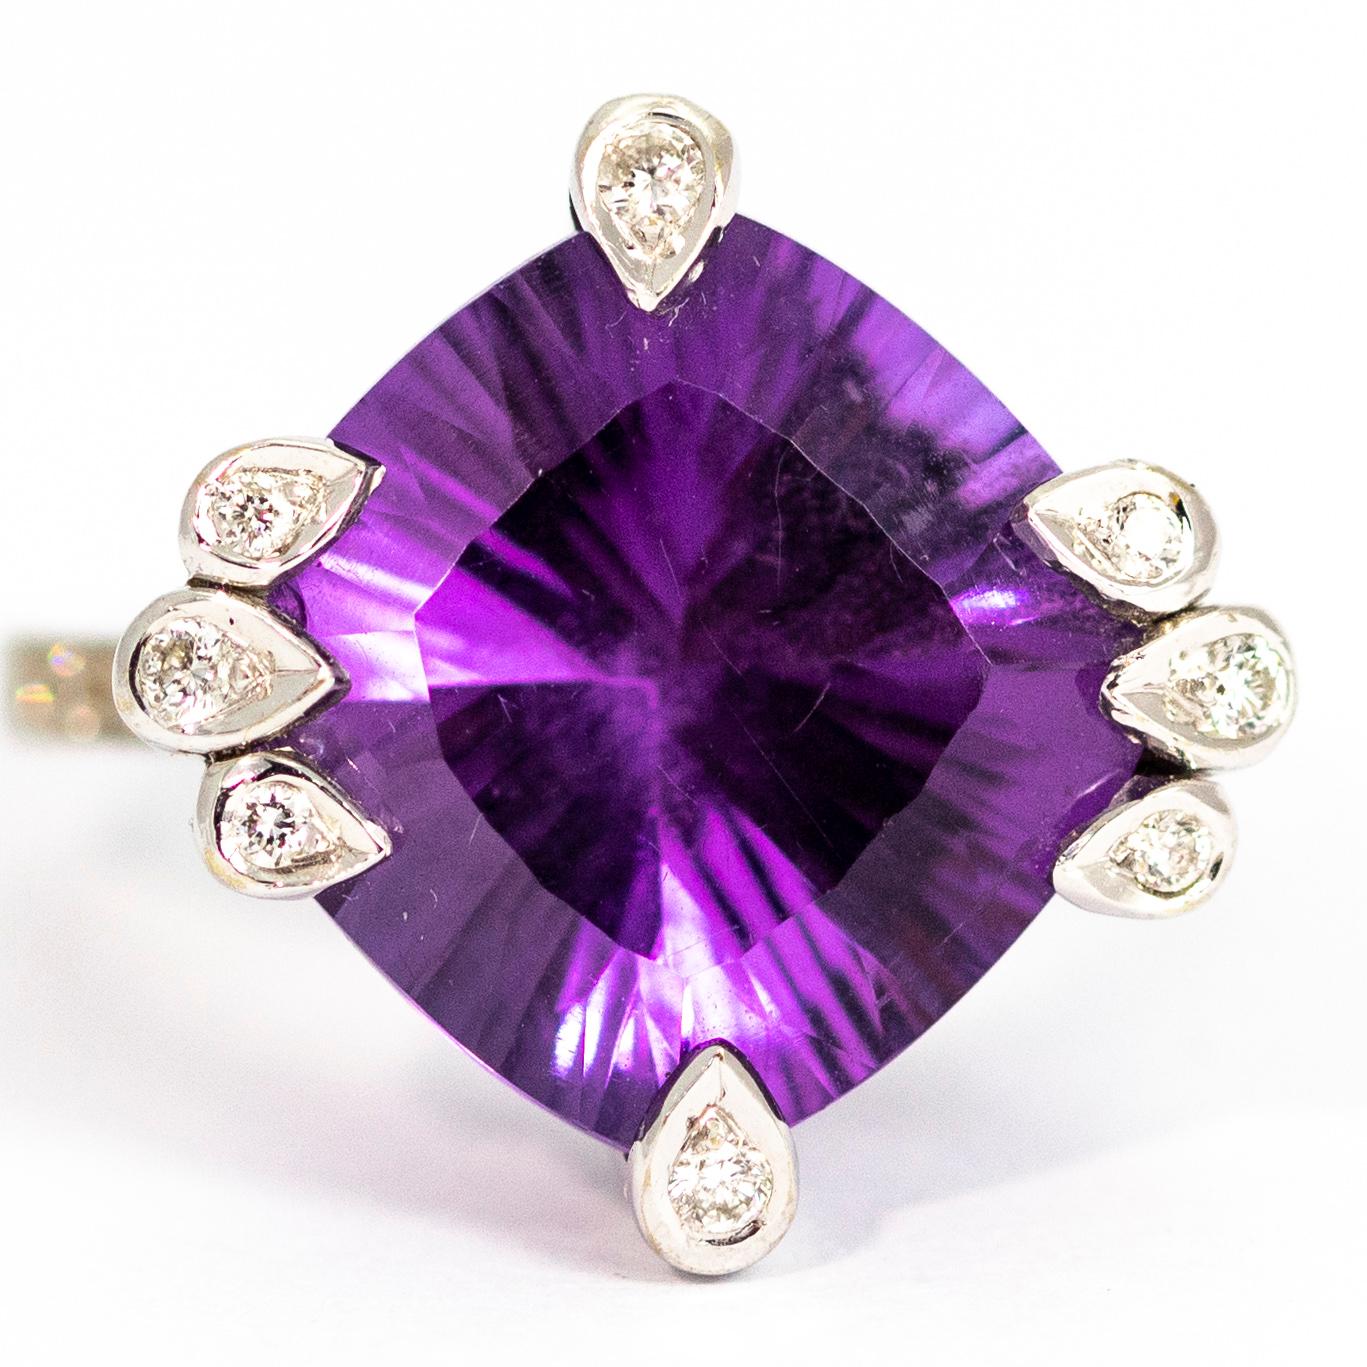 This ring is sure to get you noticed! It holds a large glittering amethyst has a stunning hall of mirrors effect and the claws which hold the stone each hold a sparkling diamond too! The shoulders to this ring also hold a row of five diamonds each